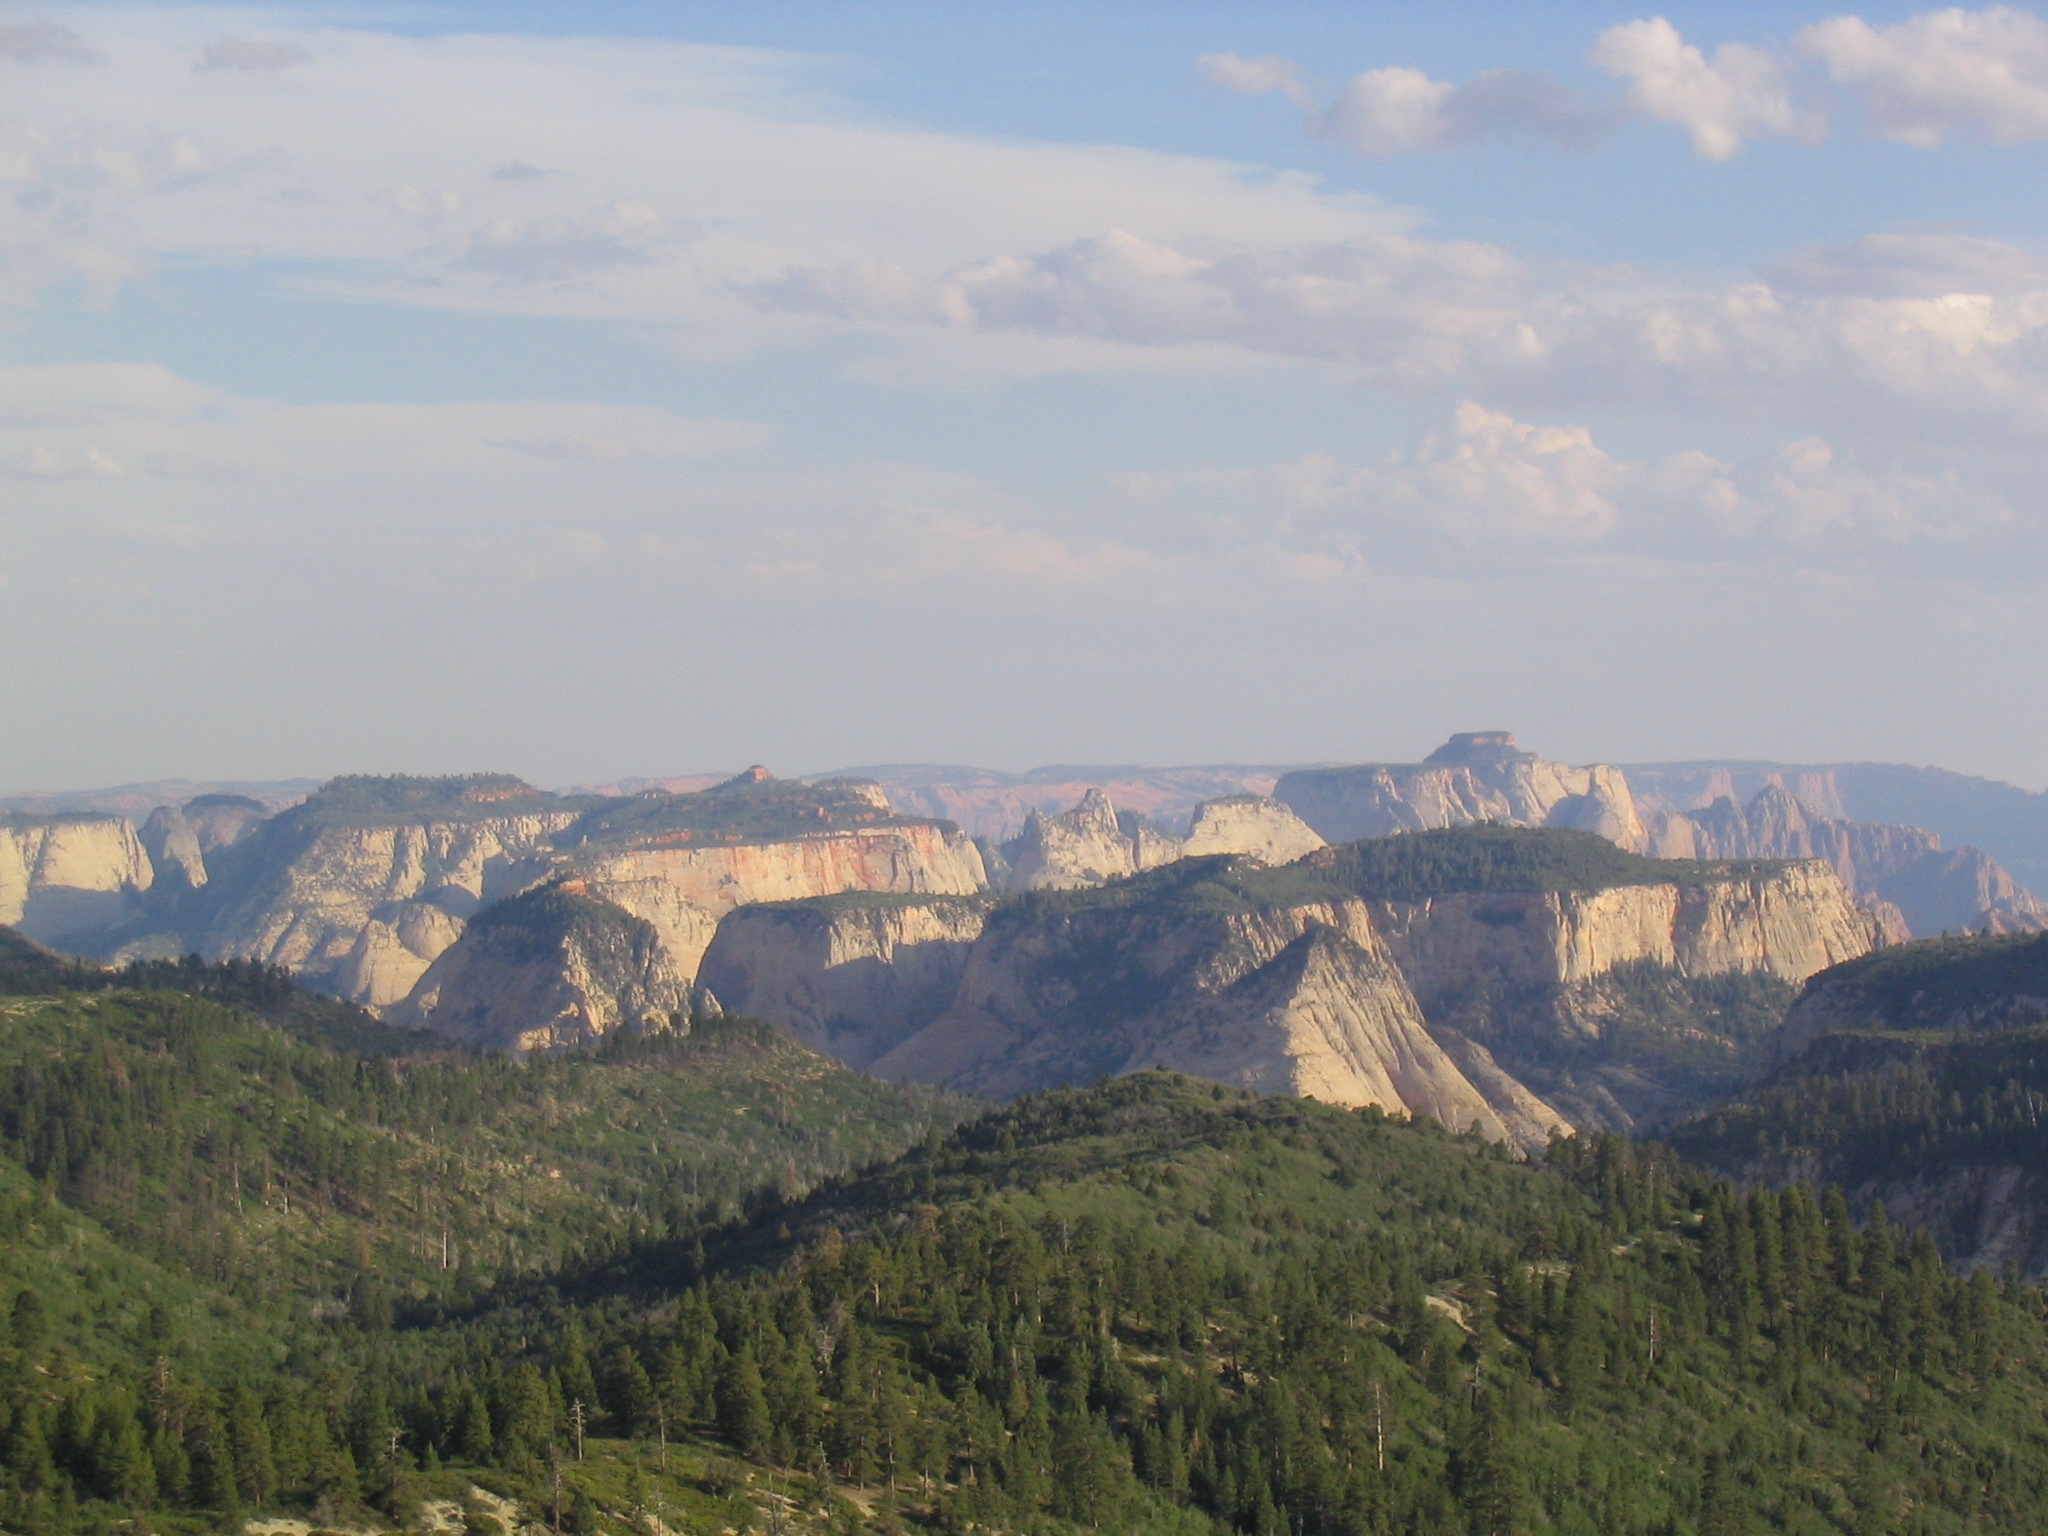 The view of Zion National Park from Lava Point.